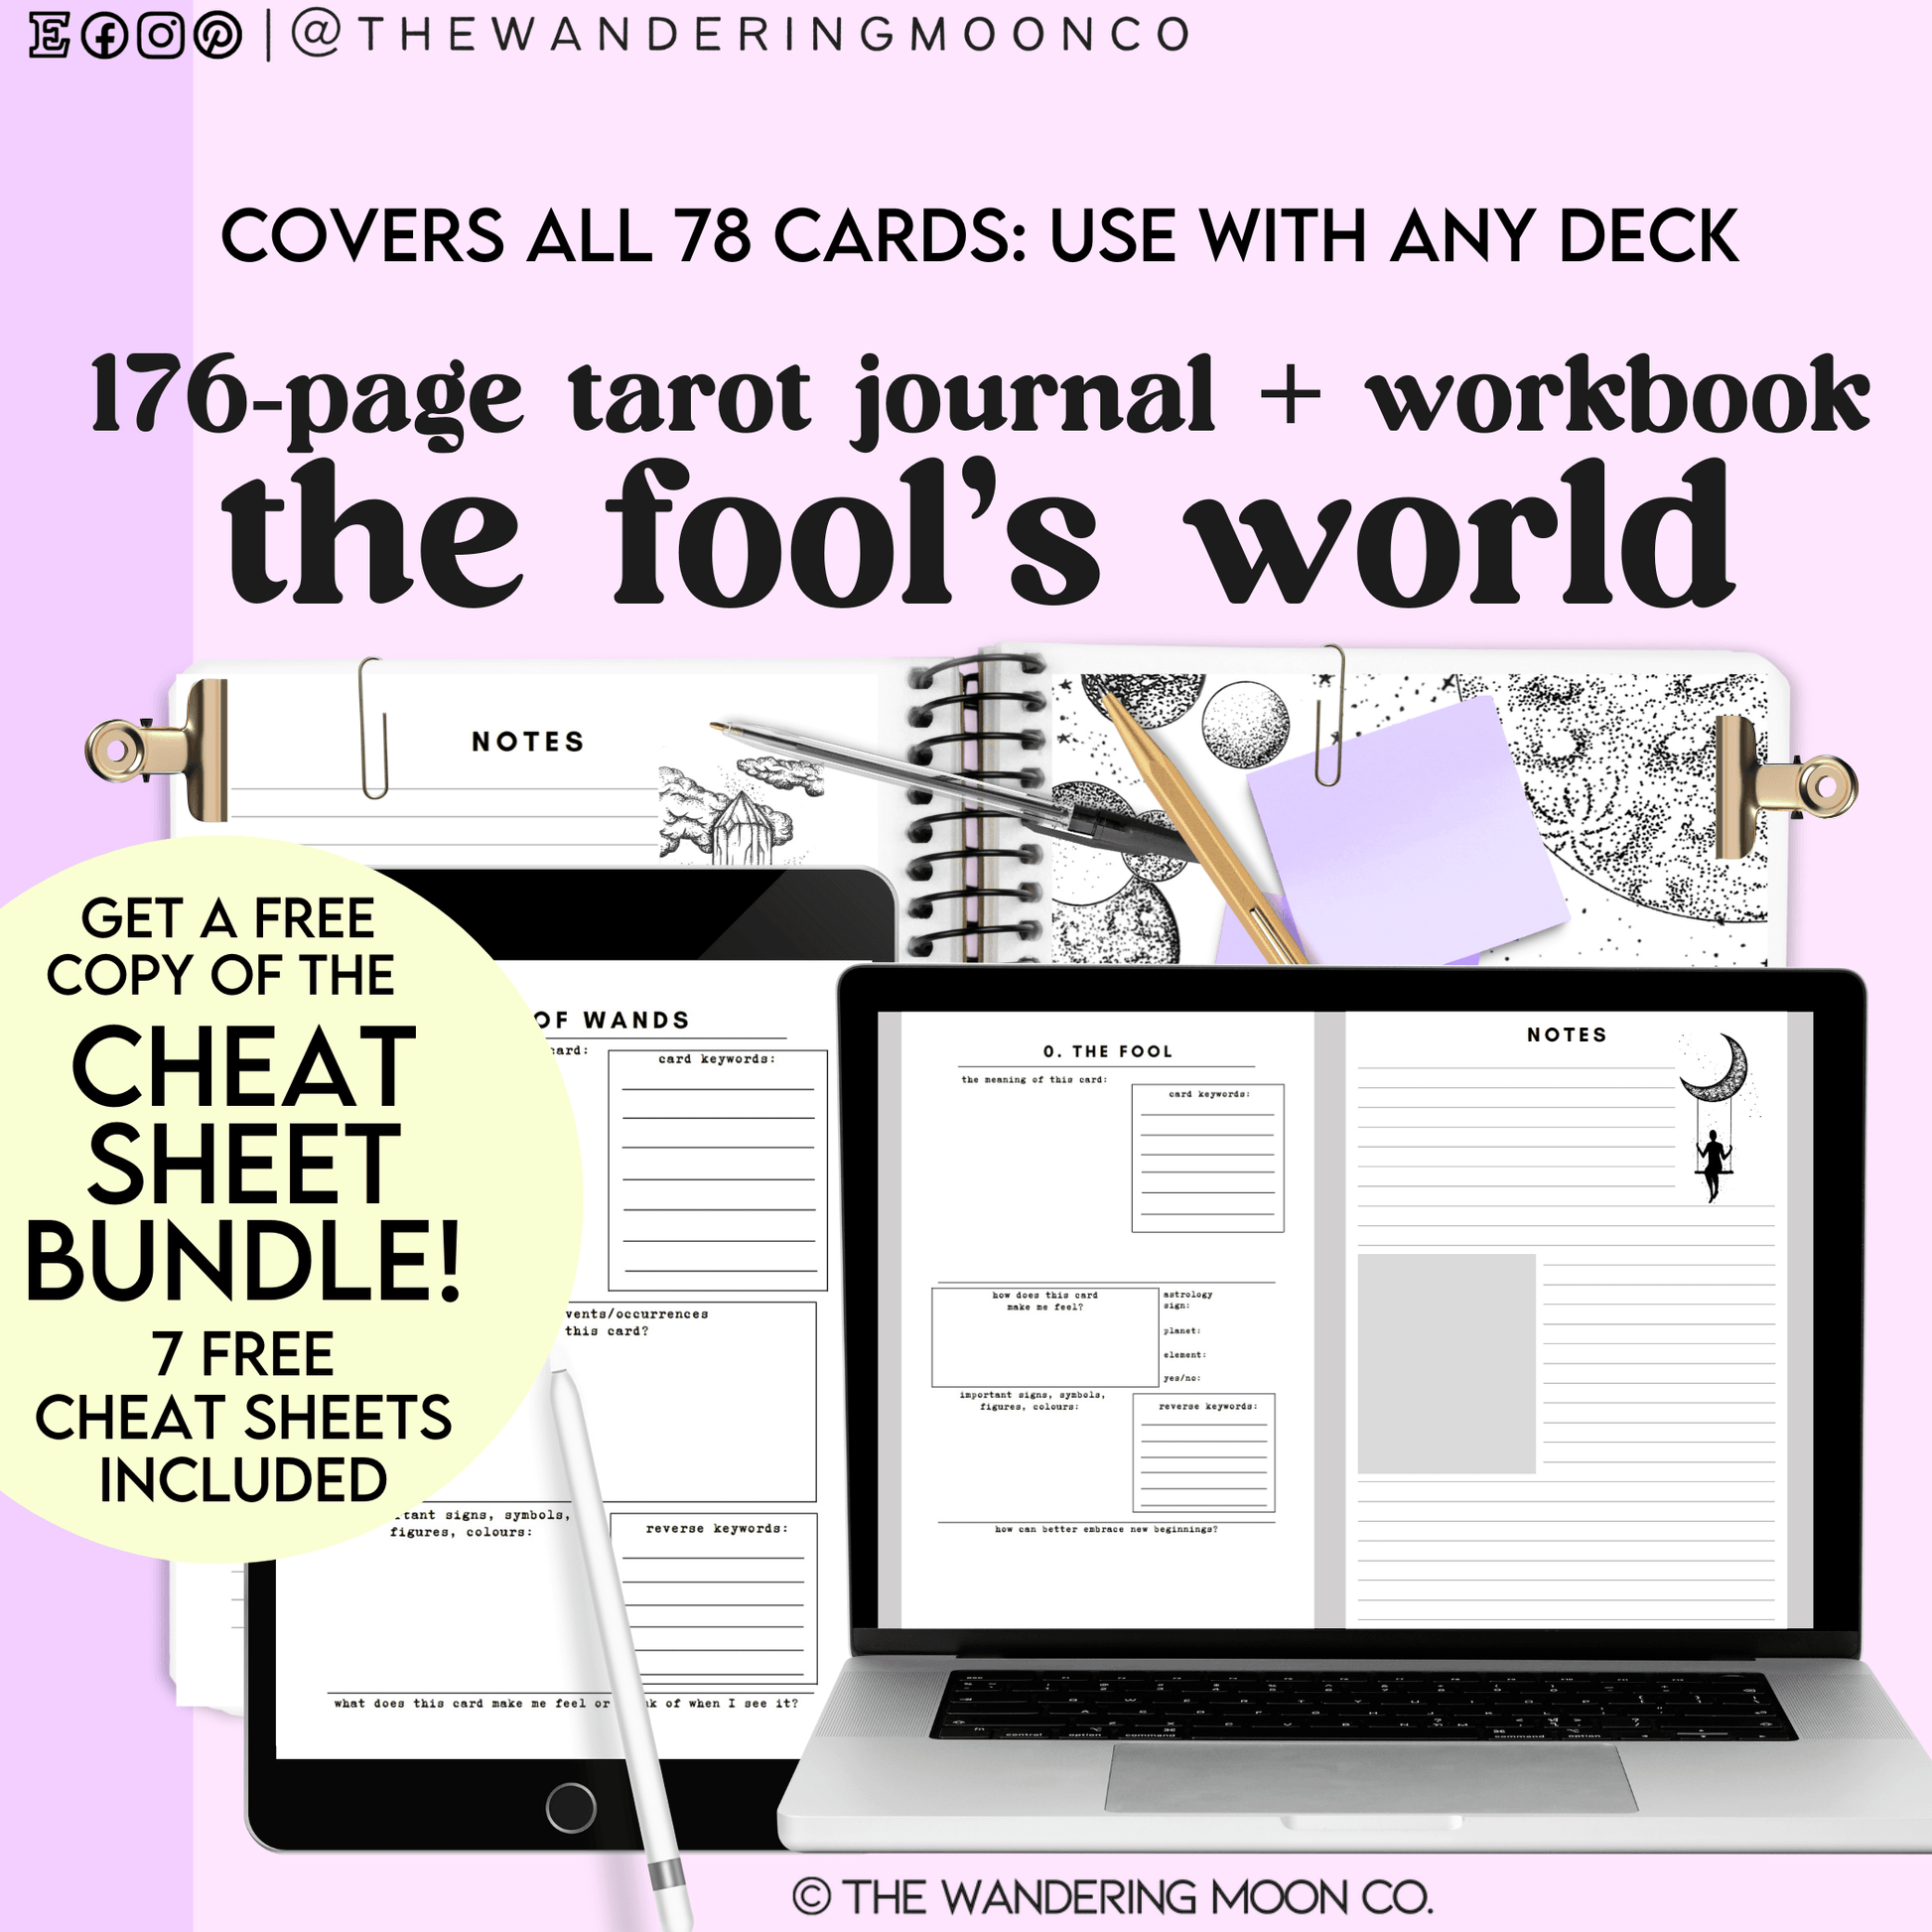 tarot card journal page: the shadow card | digital, printable, download PDF - The Wandering Moon Co.